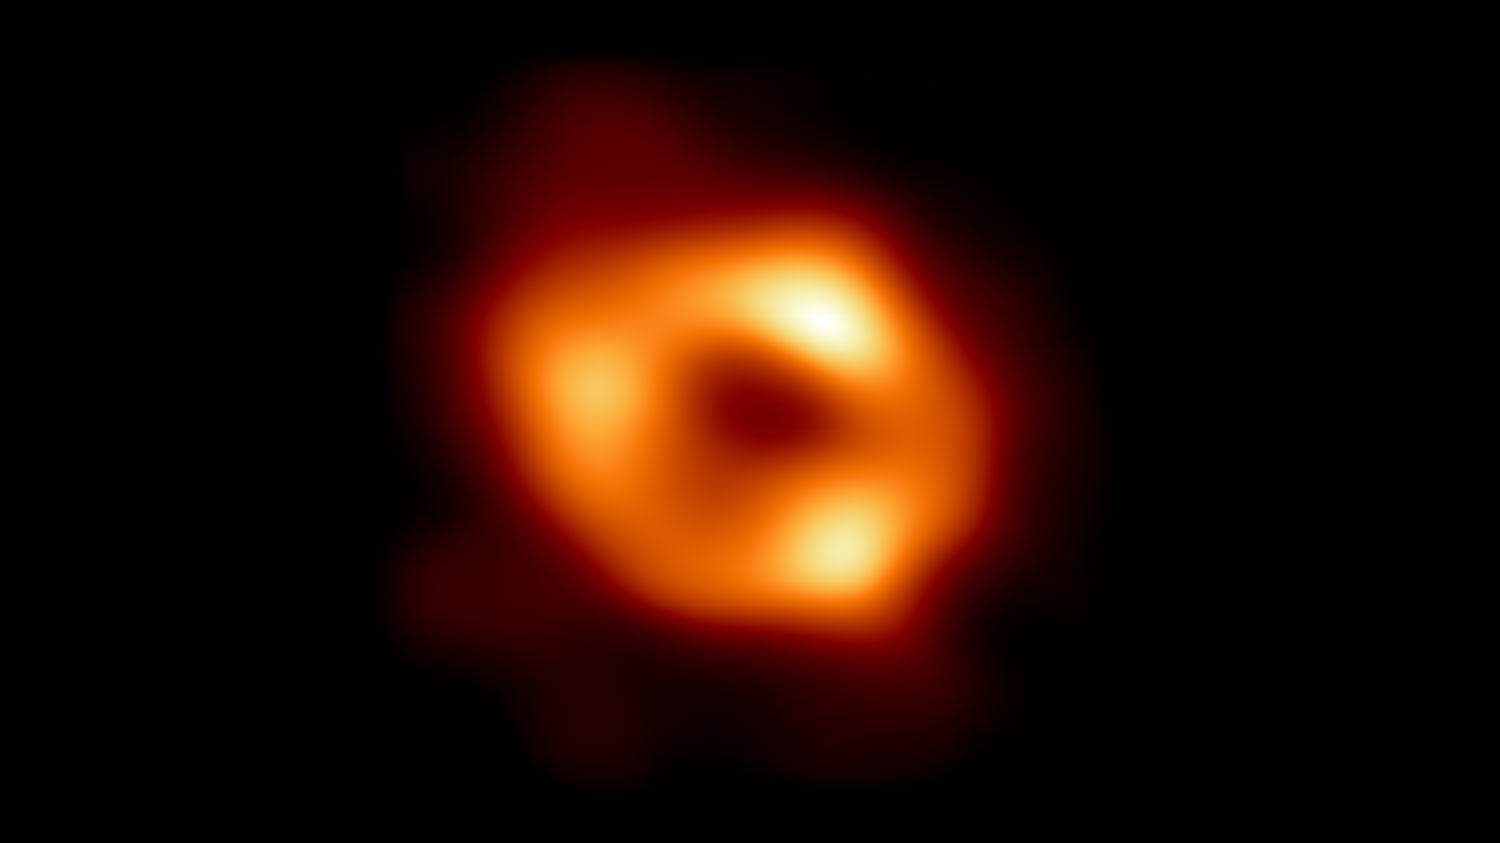 The bright orange ring shows the event horizon of the Milky Way's giant black hole, Sagittarius A*.  This is one of our best space images.